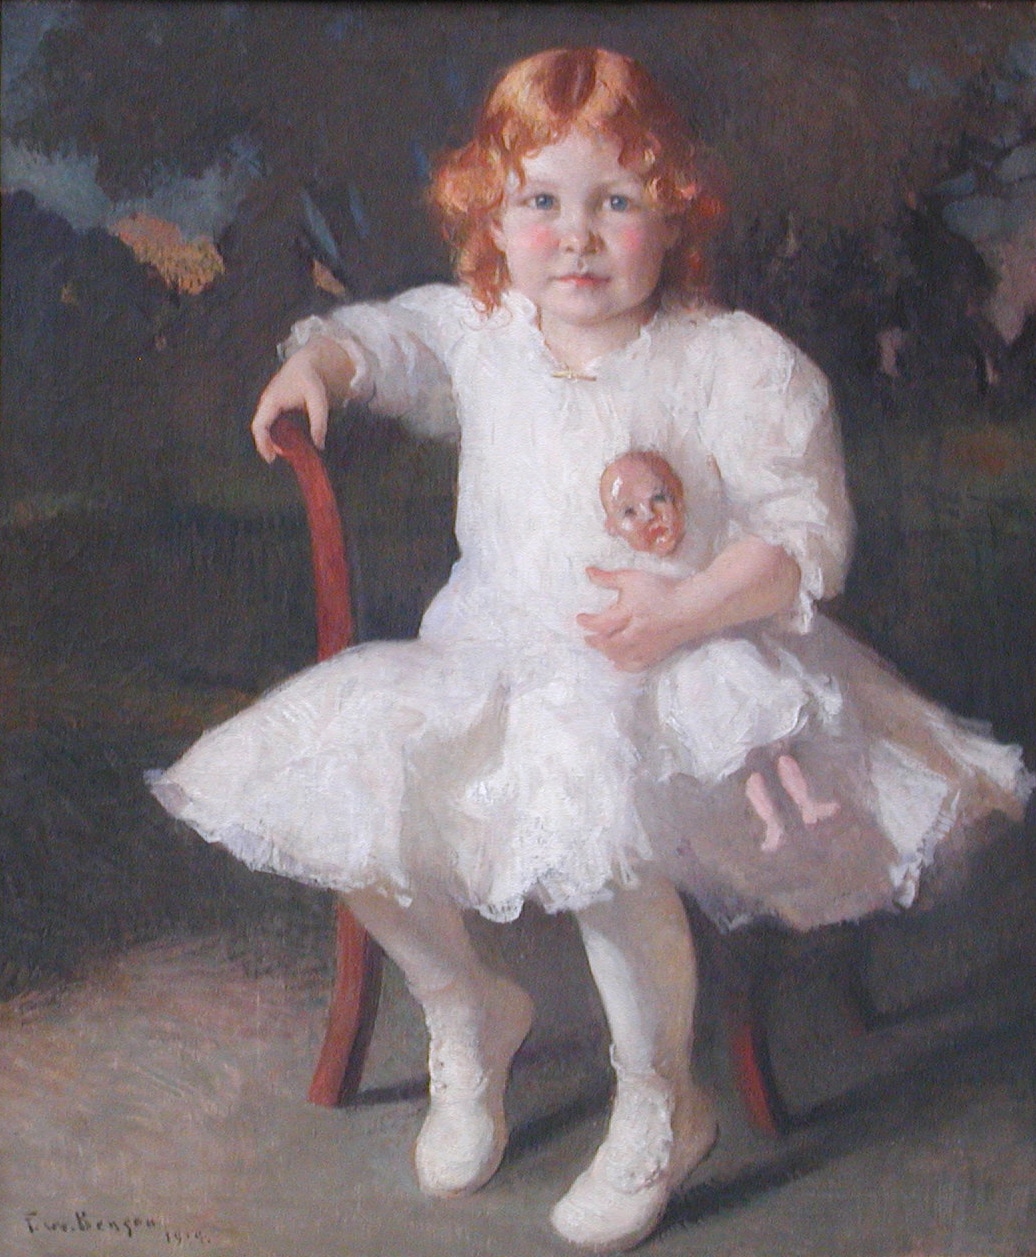 a portrait painting of a young girl in a white dress holding a doll in a white dress